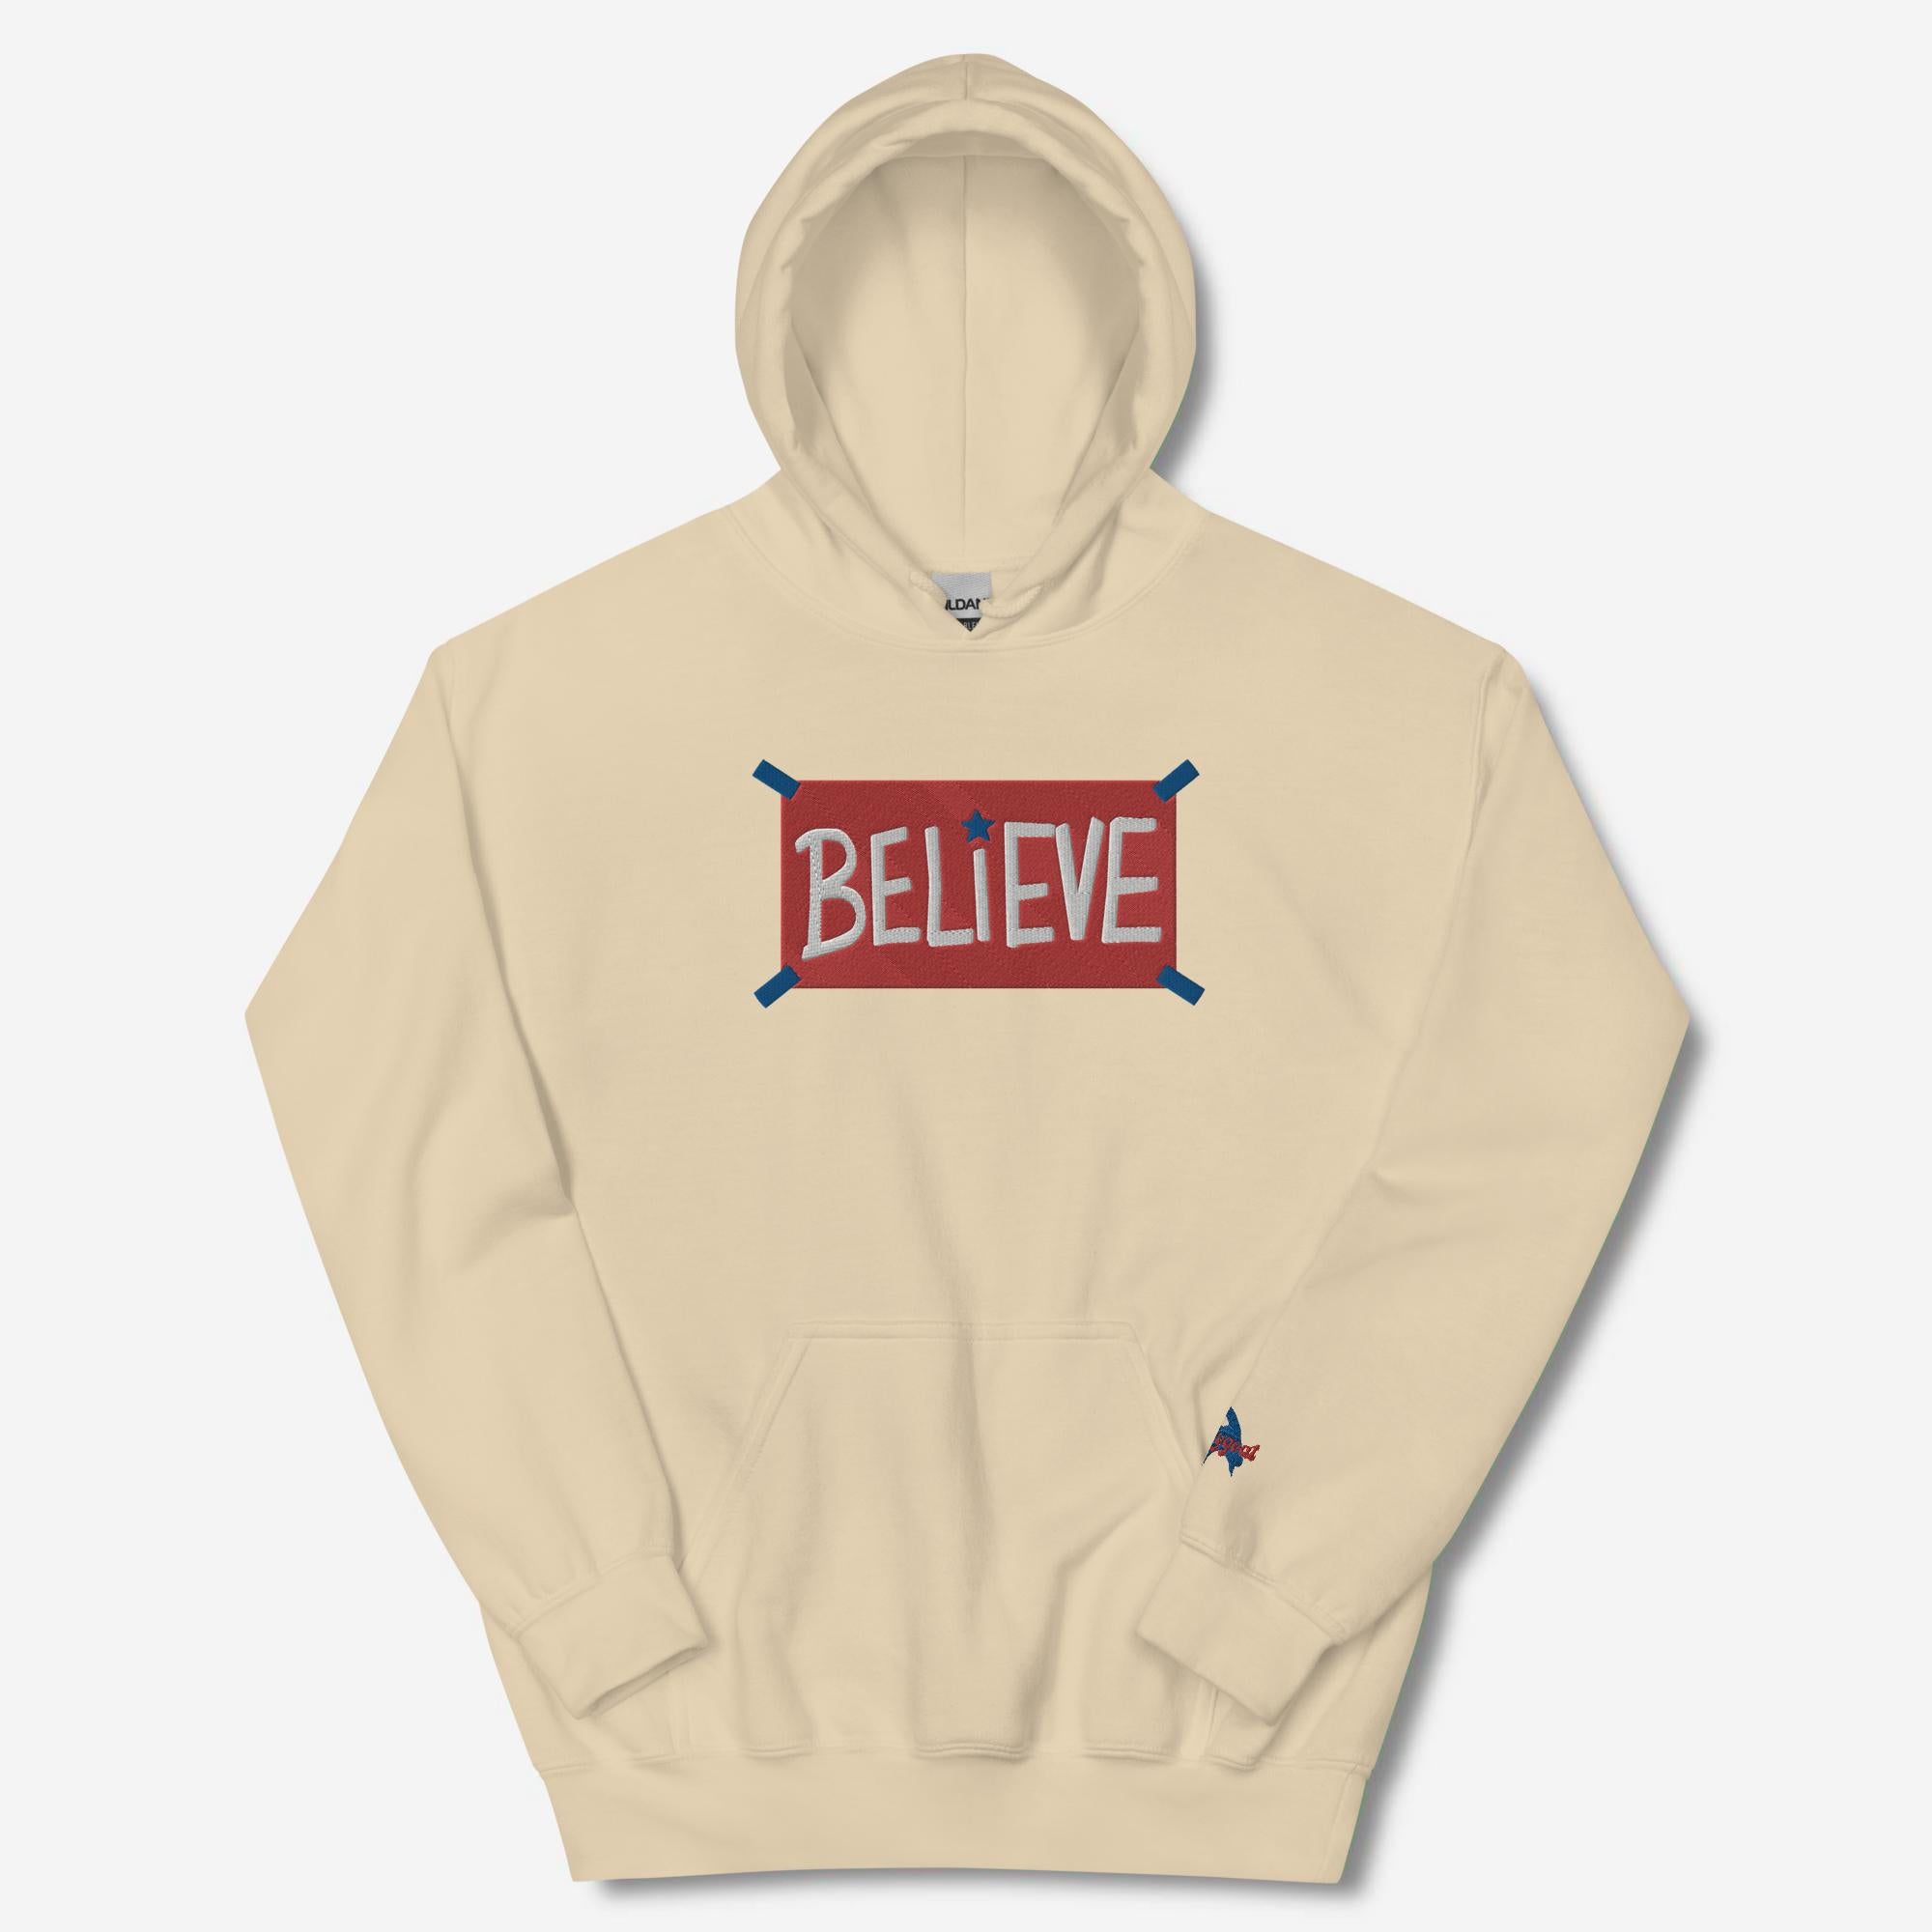 "Believe" Embroidered Hoodie